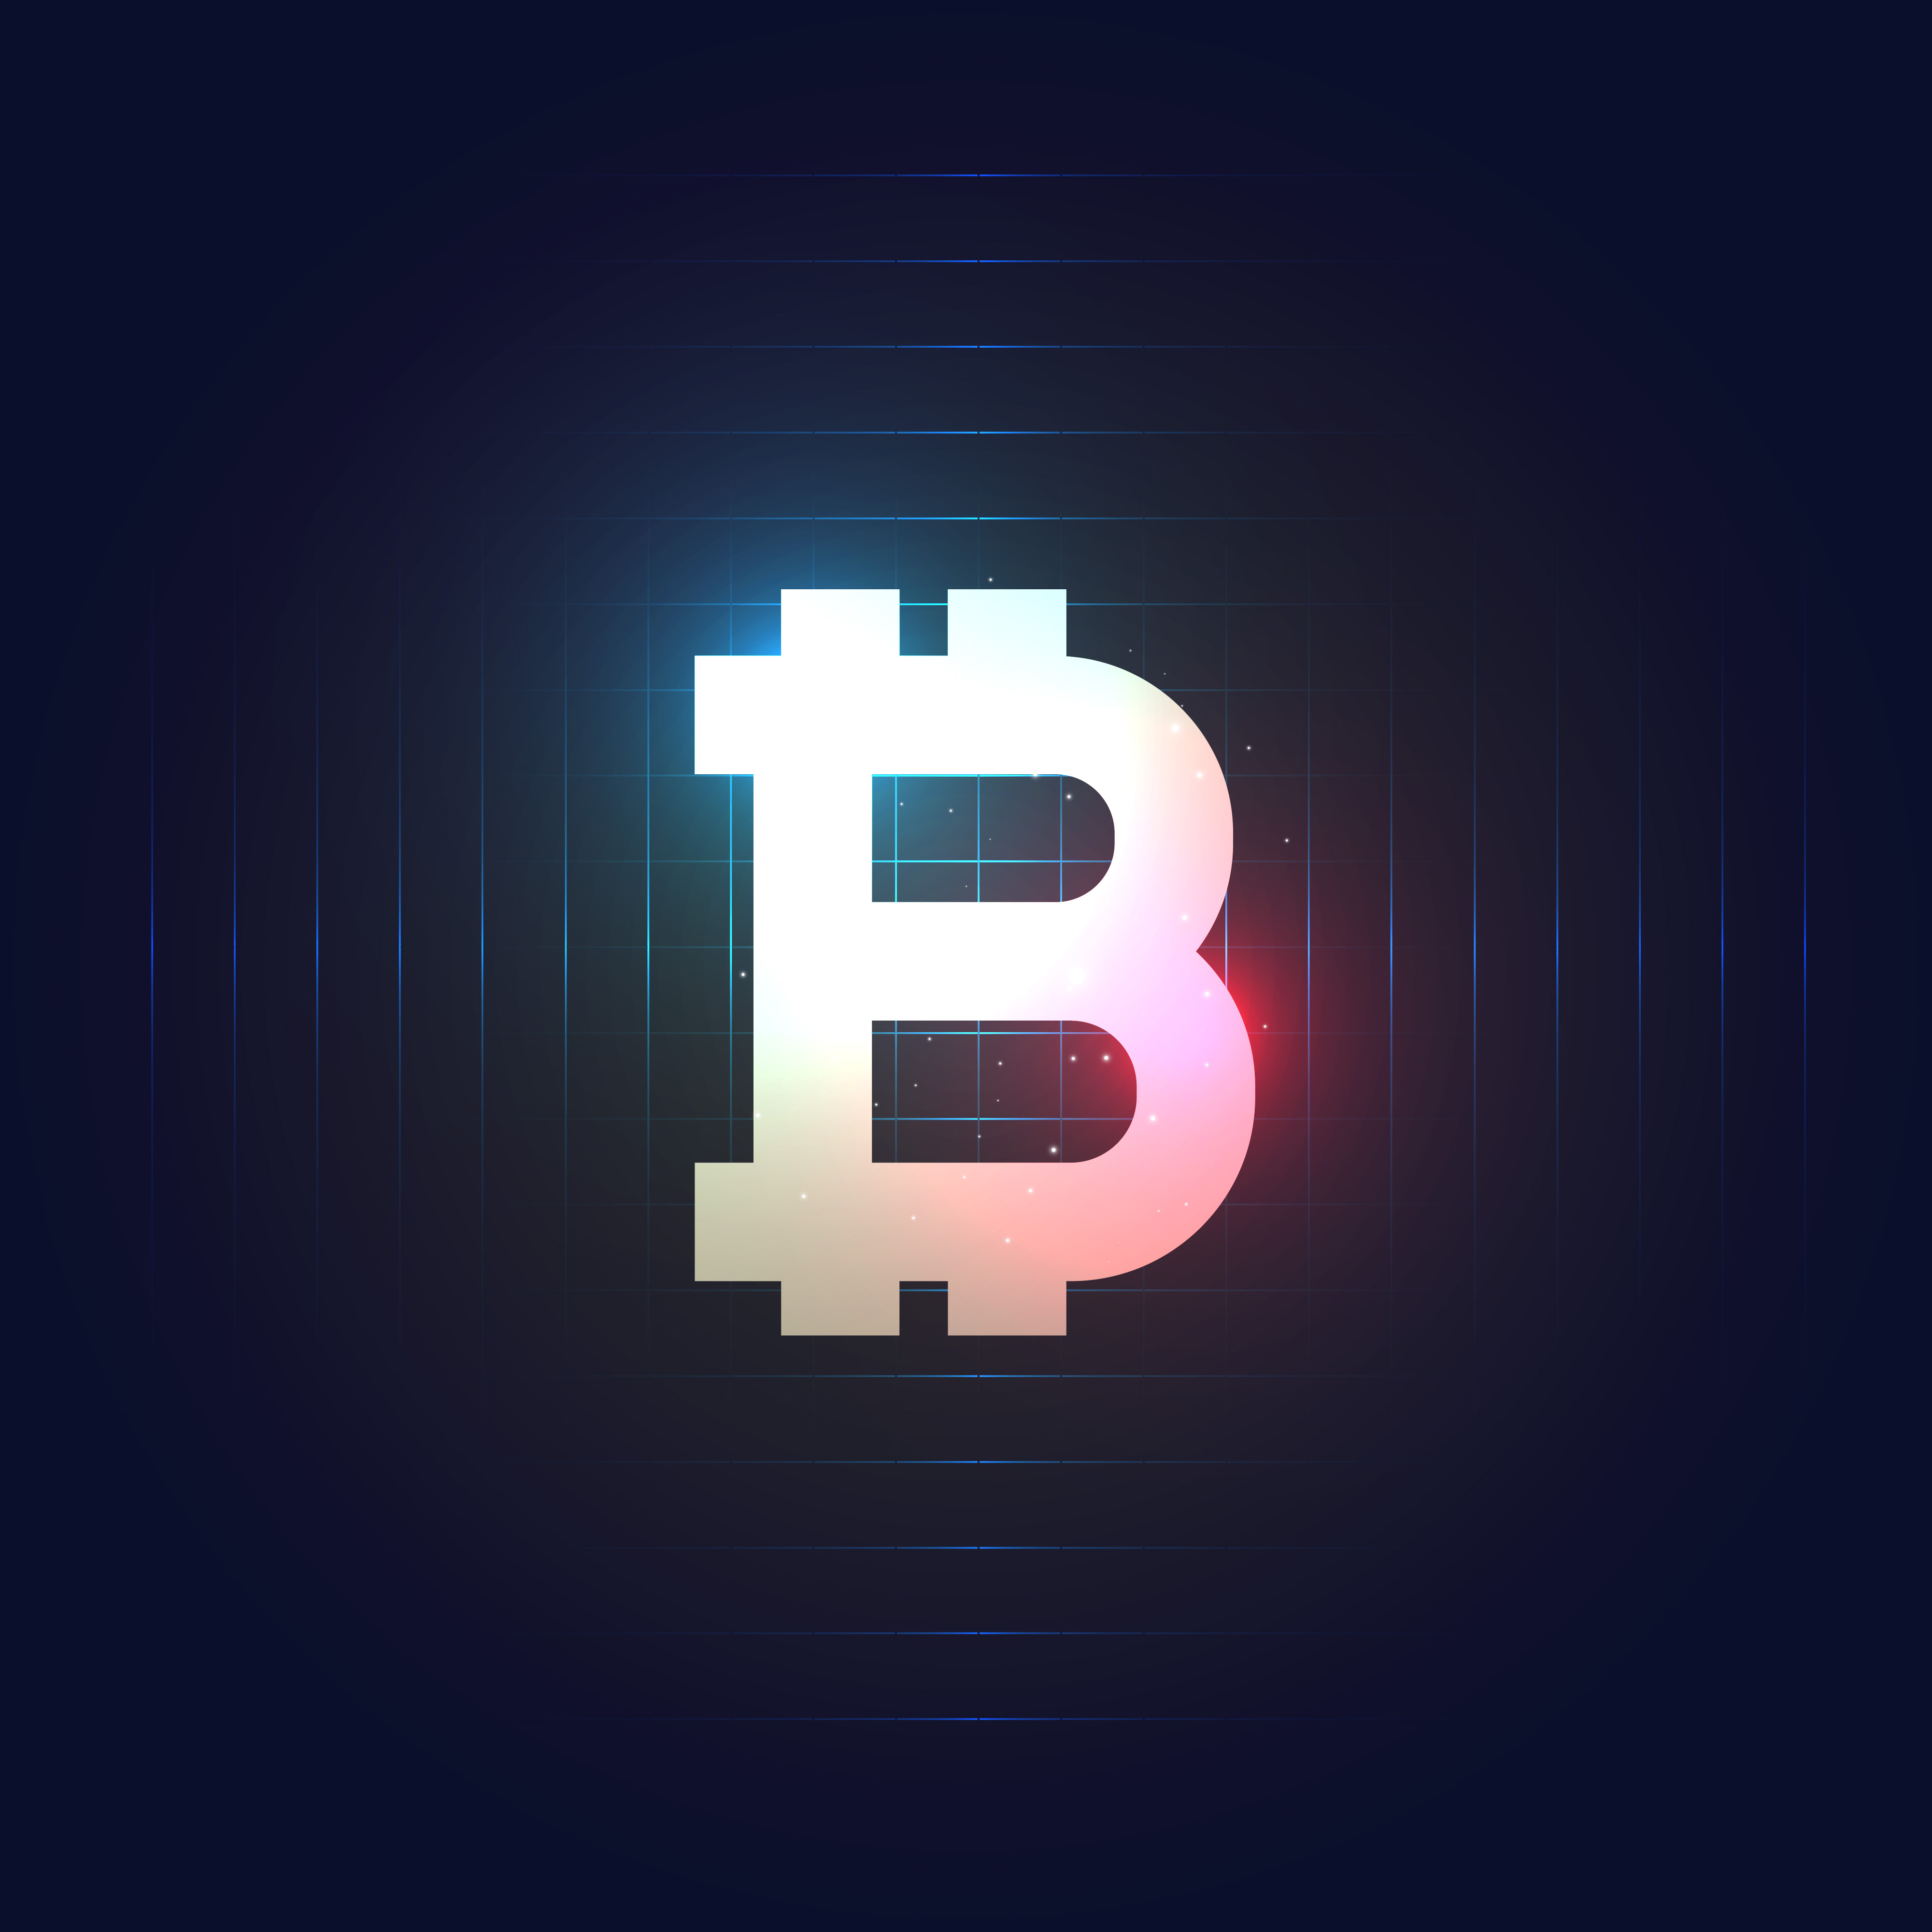 bitcoin symbol on dark blue background - Download Free Vector Art, Stock Graphics & Images